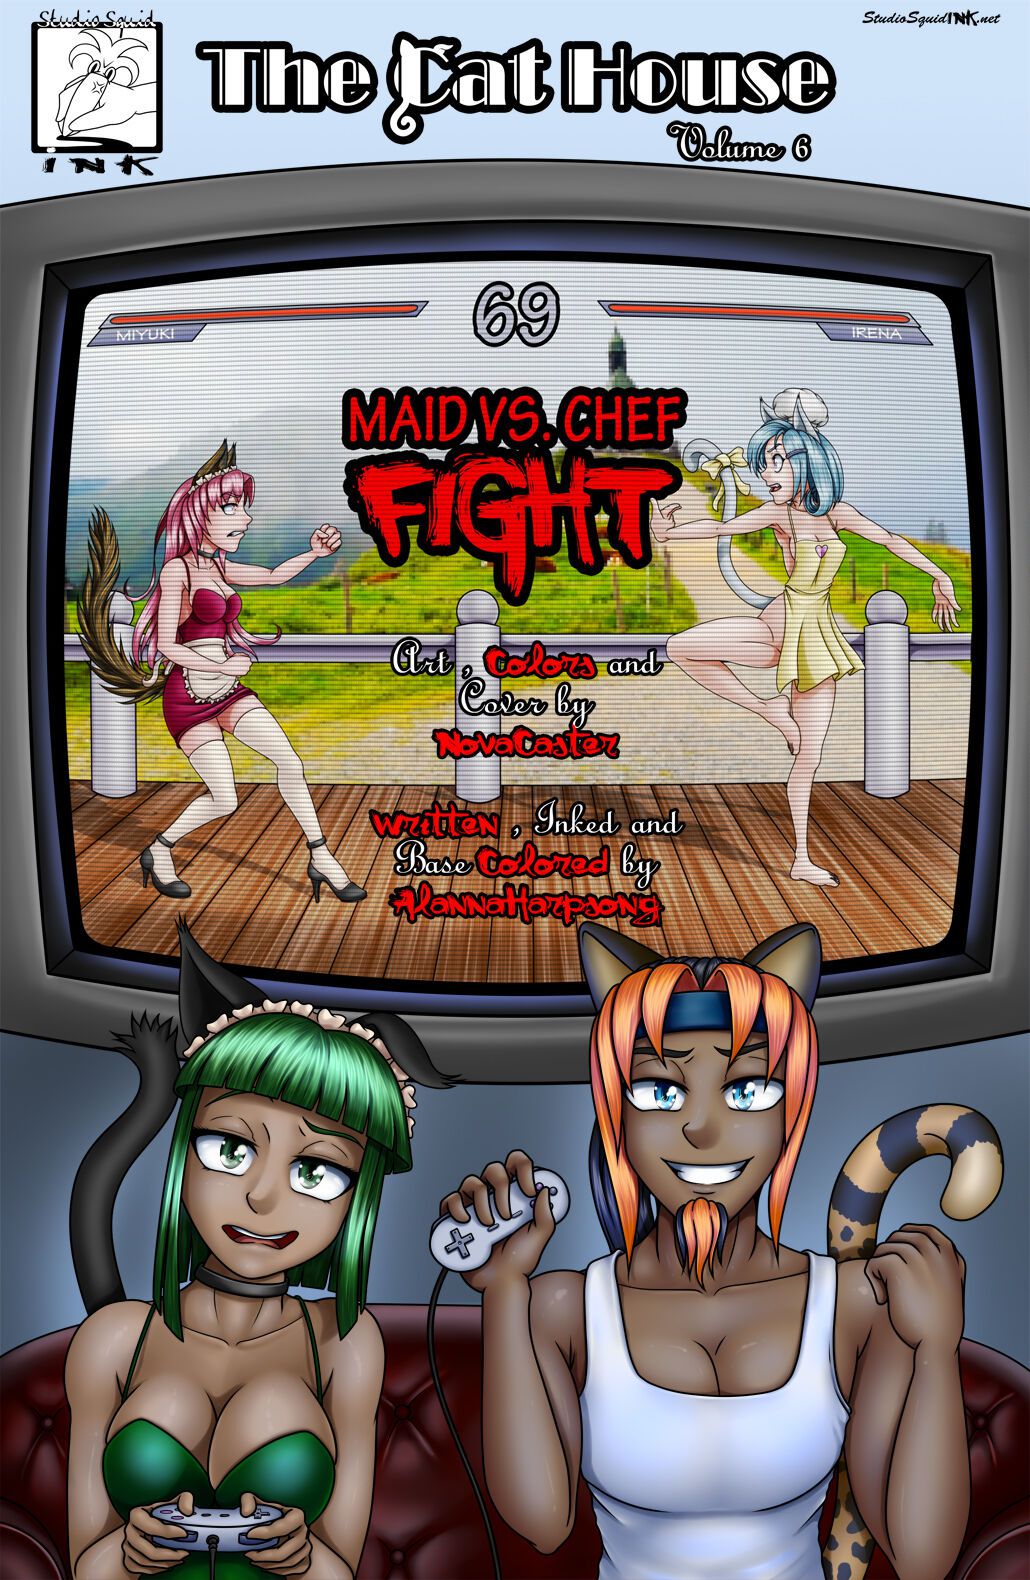 [NovaCaster] The Cat House Vol. 6: Maid vs Chef Fight (ongoing) 1